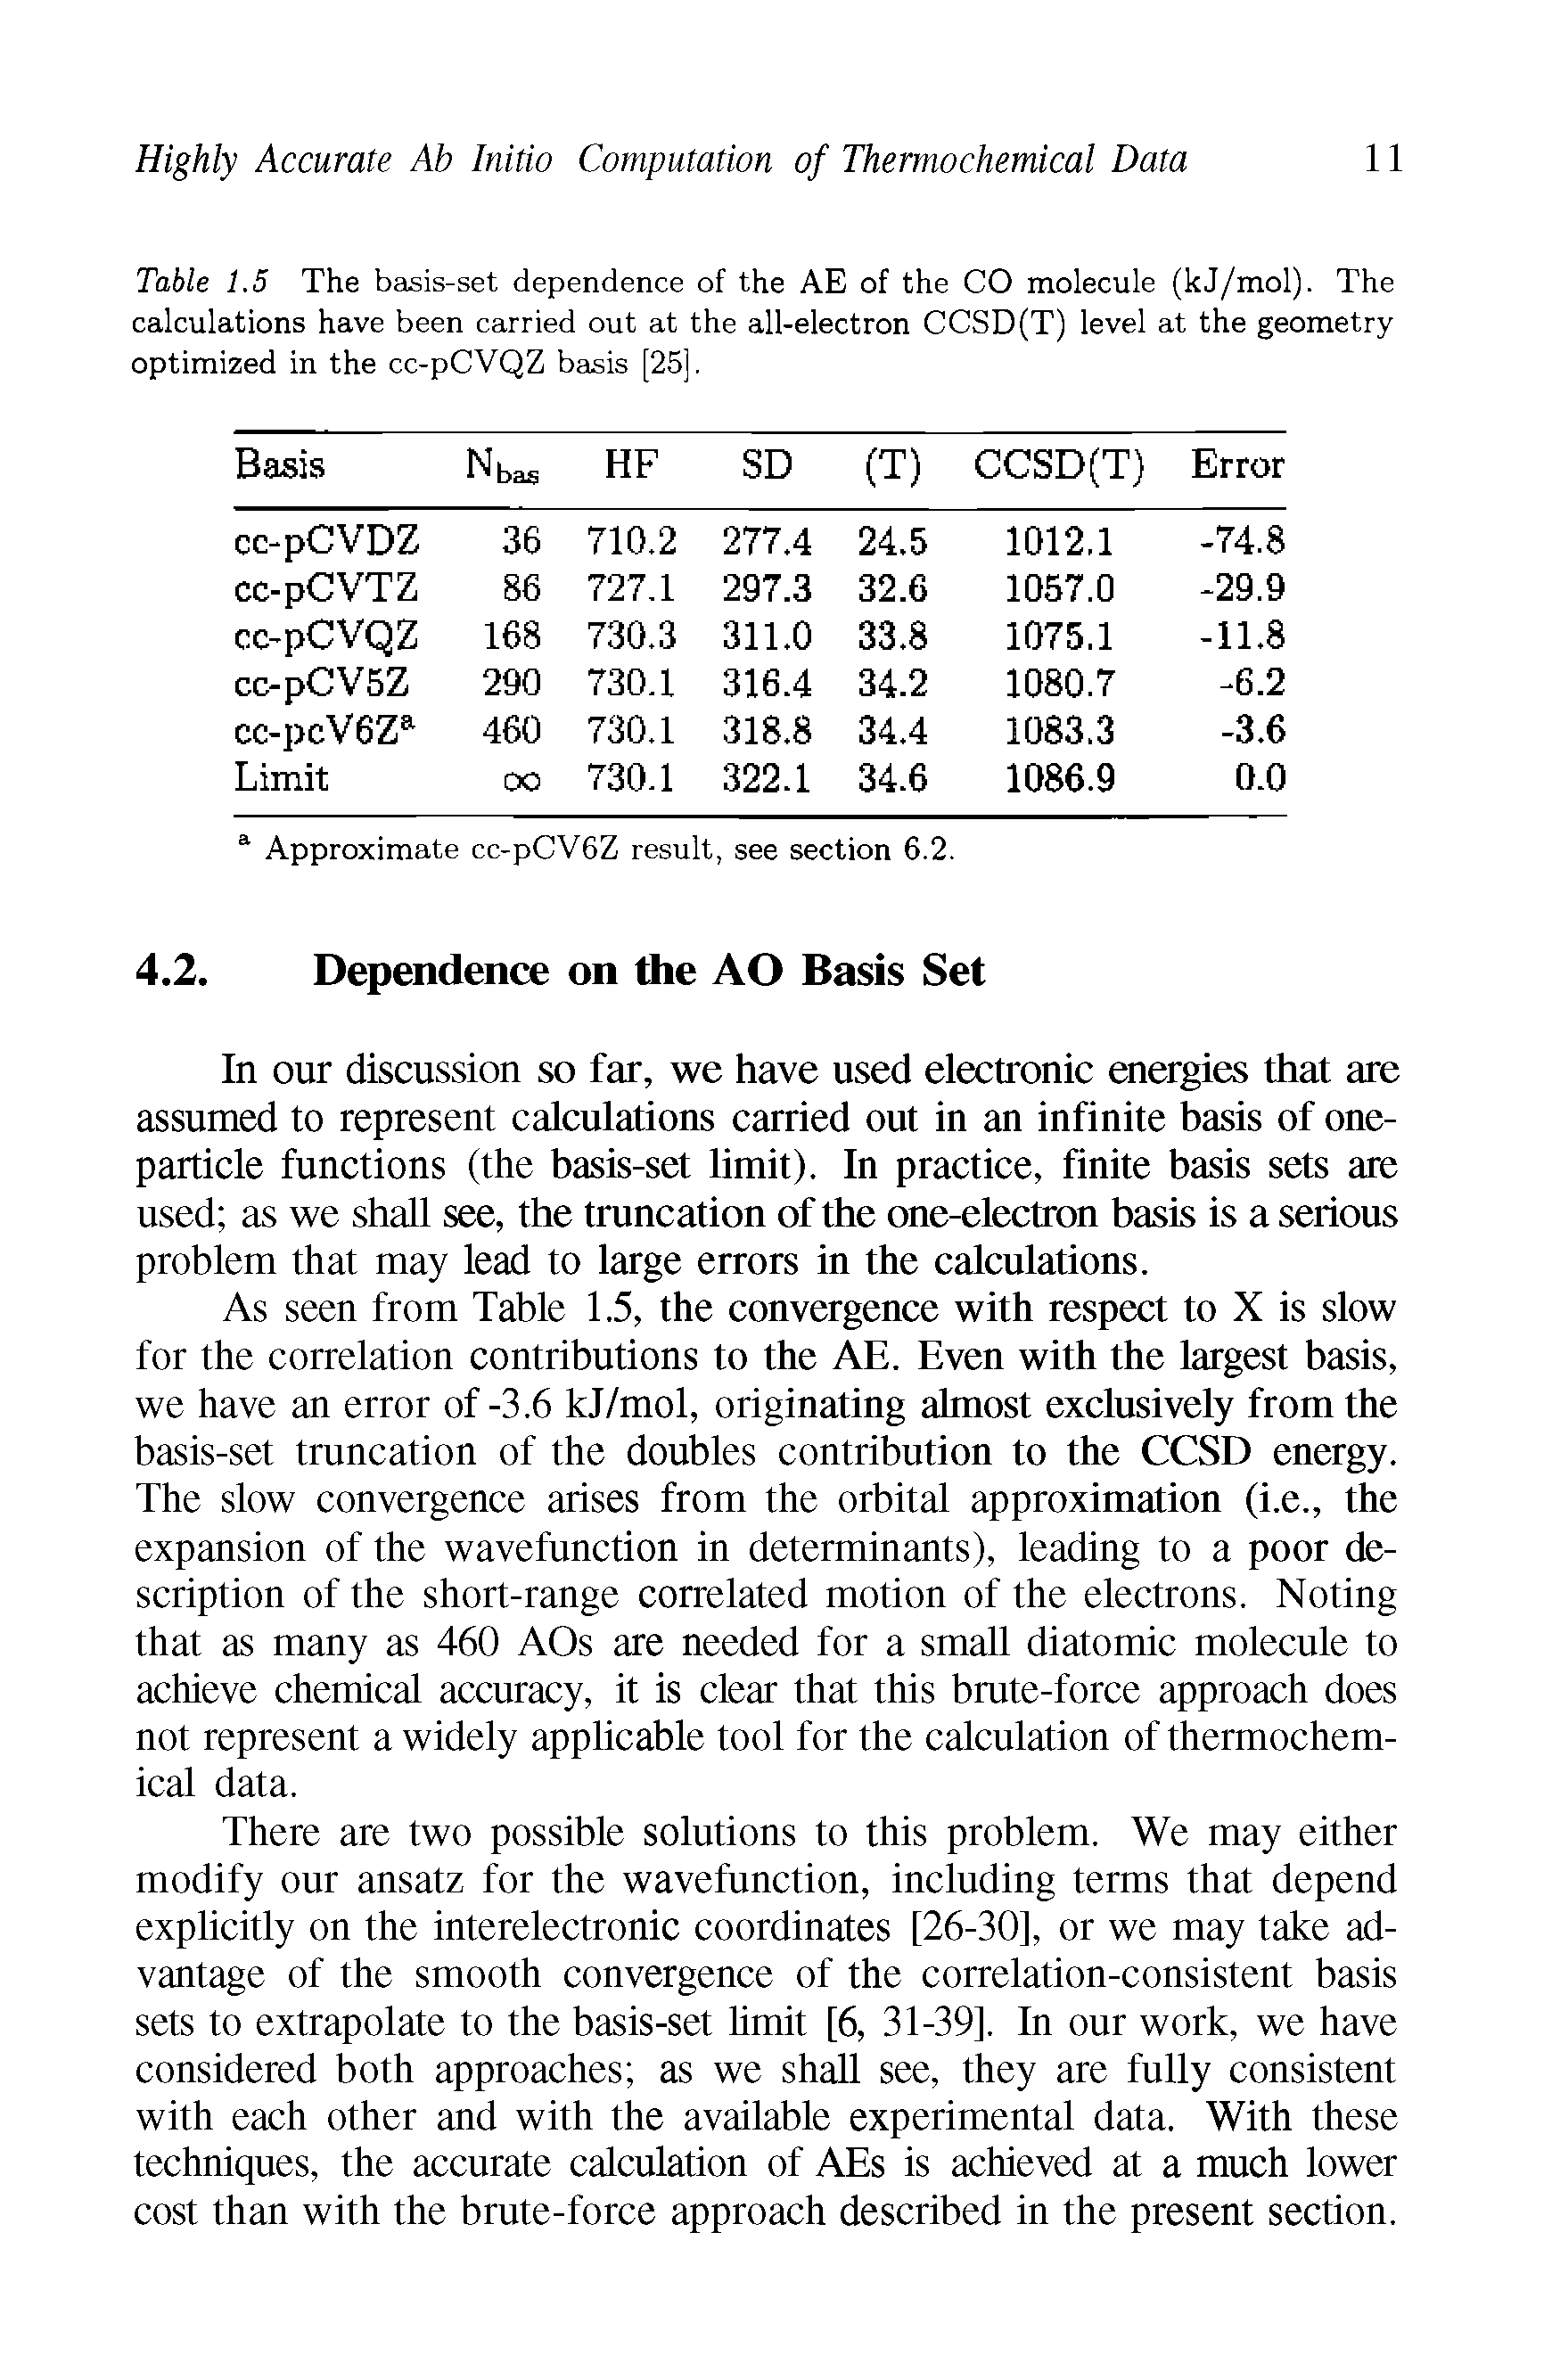 Table 1.5 The basis-set dependence of the AE of the CO molecule (kJ/mol). The calculations have been carried out at the all-electron CCSD(T) level at the geometry optimized in the cc-pCVQZ basis [25],...